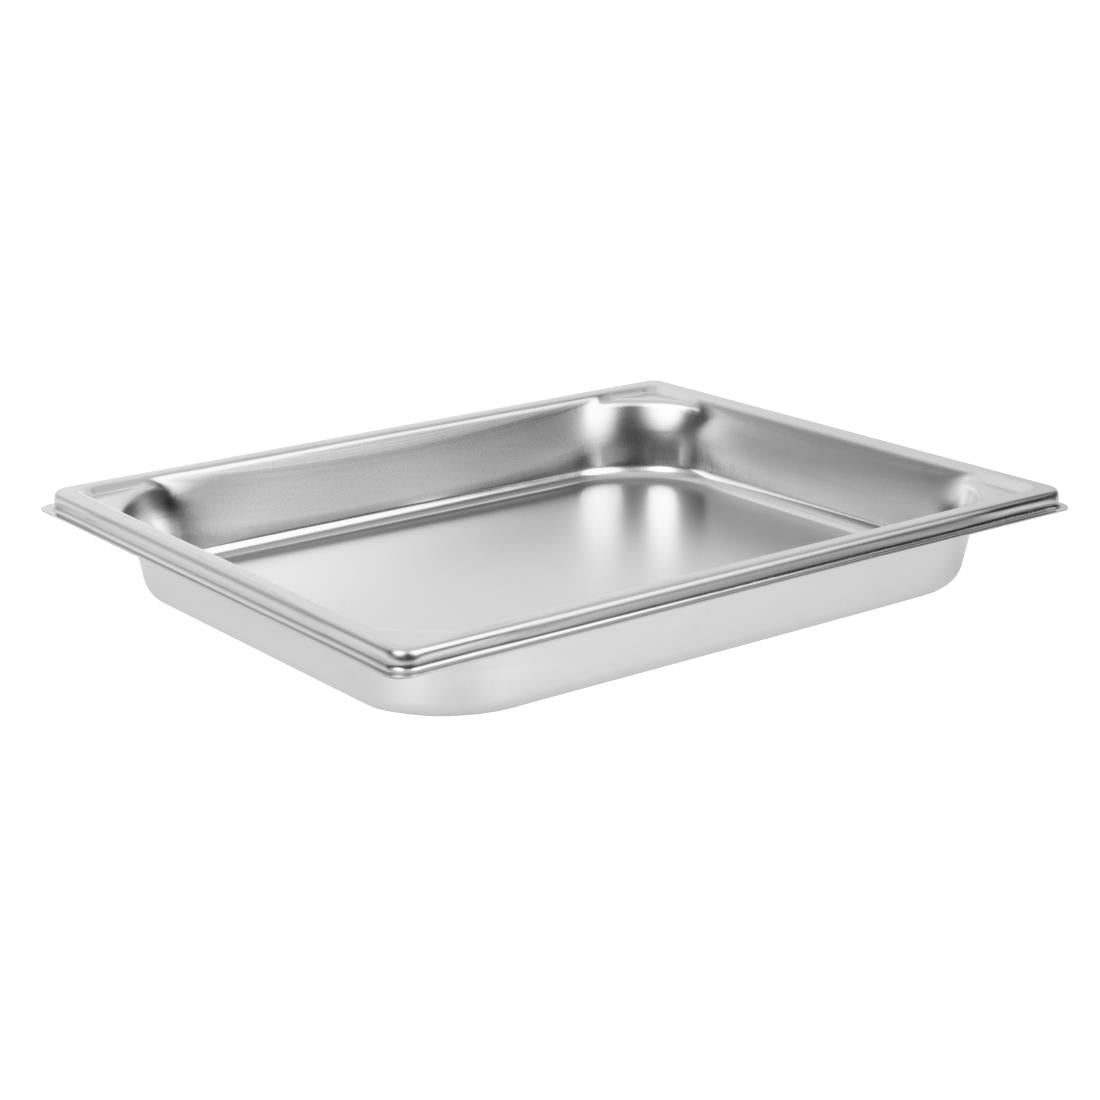 Bourgeat Stainless Steel 1/1 Gastronorm Pan 40mm JD Catering Equipment Solutions Ltd